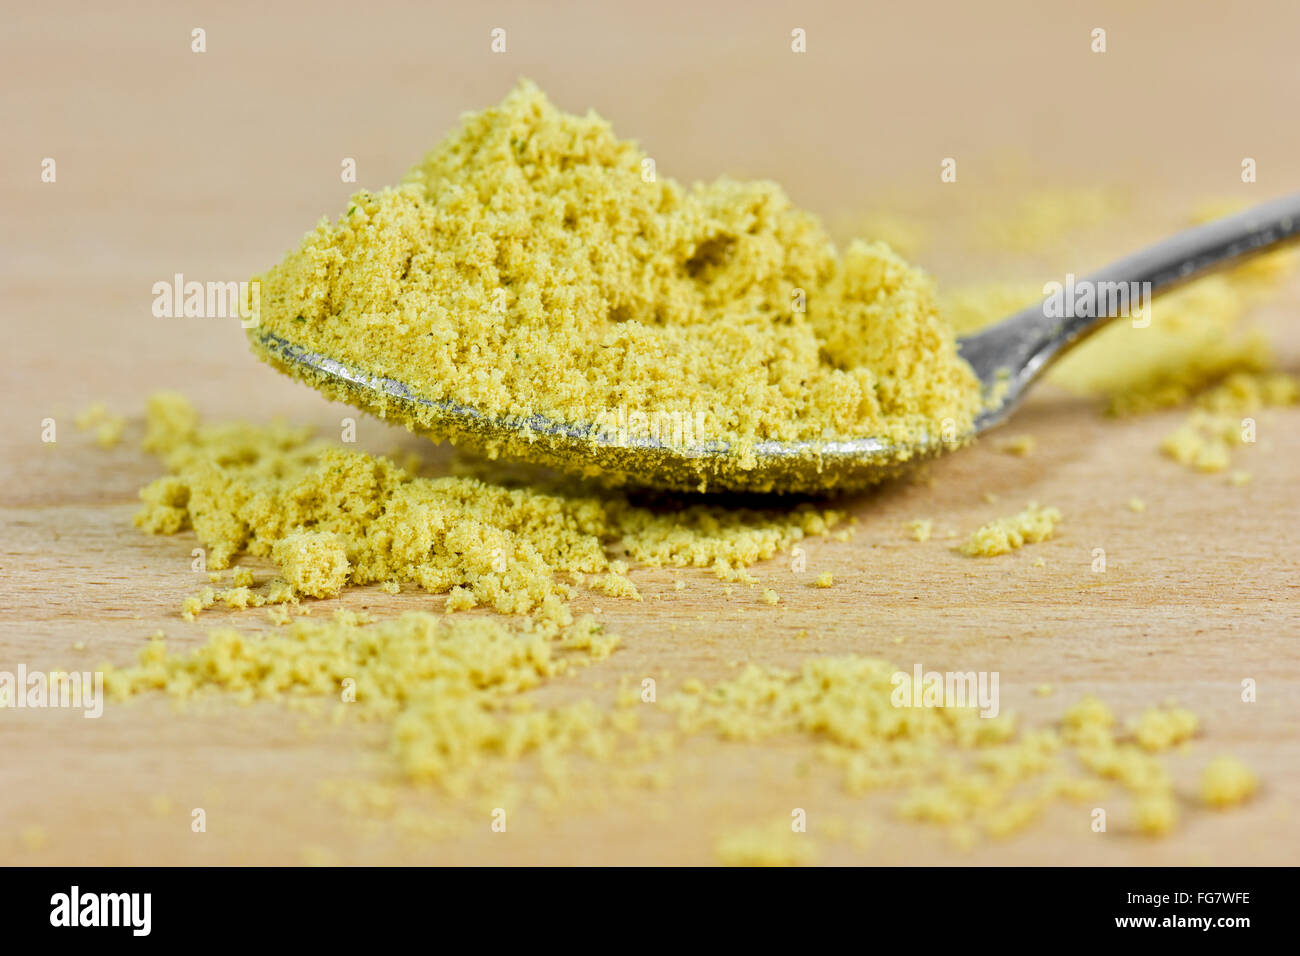 Spoonful of vegetable bouillon stock powder on chopping board Stock Photo